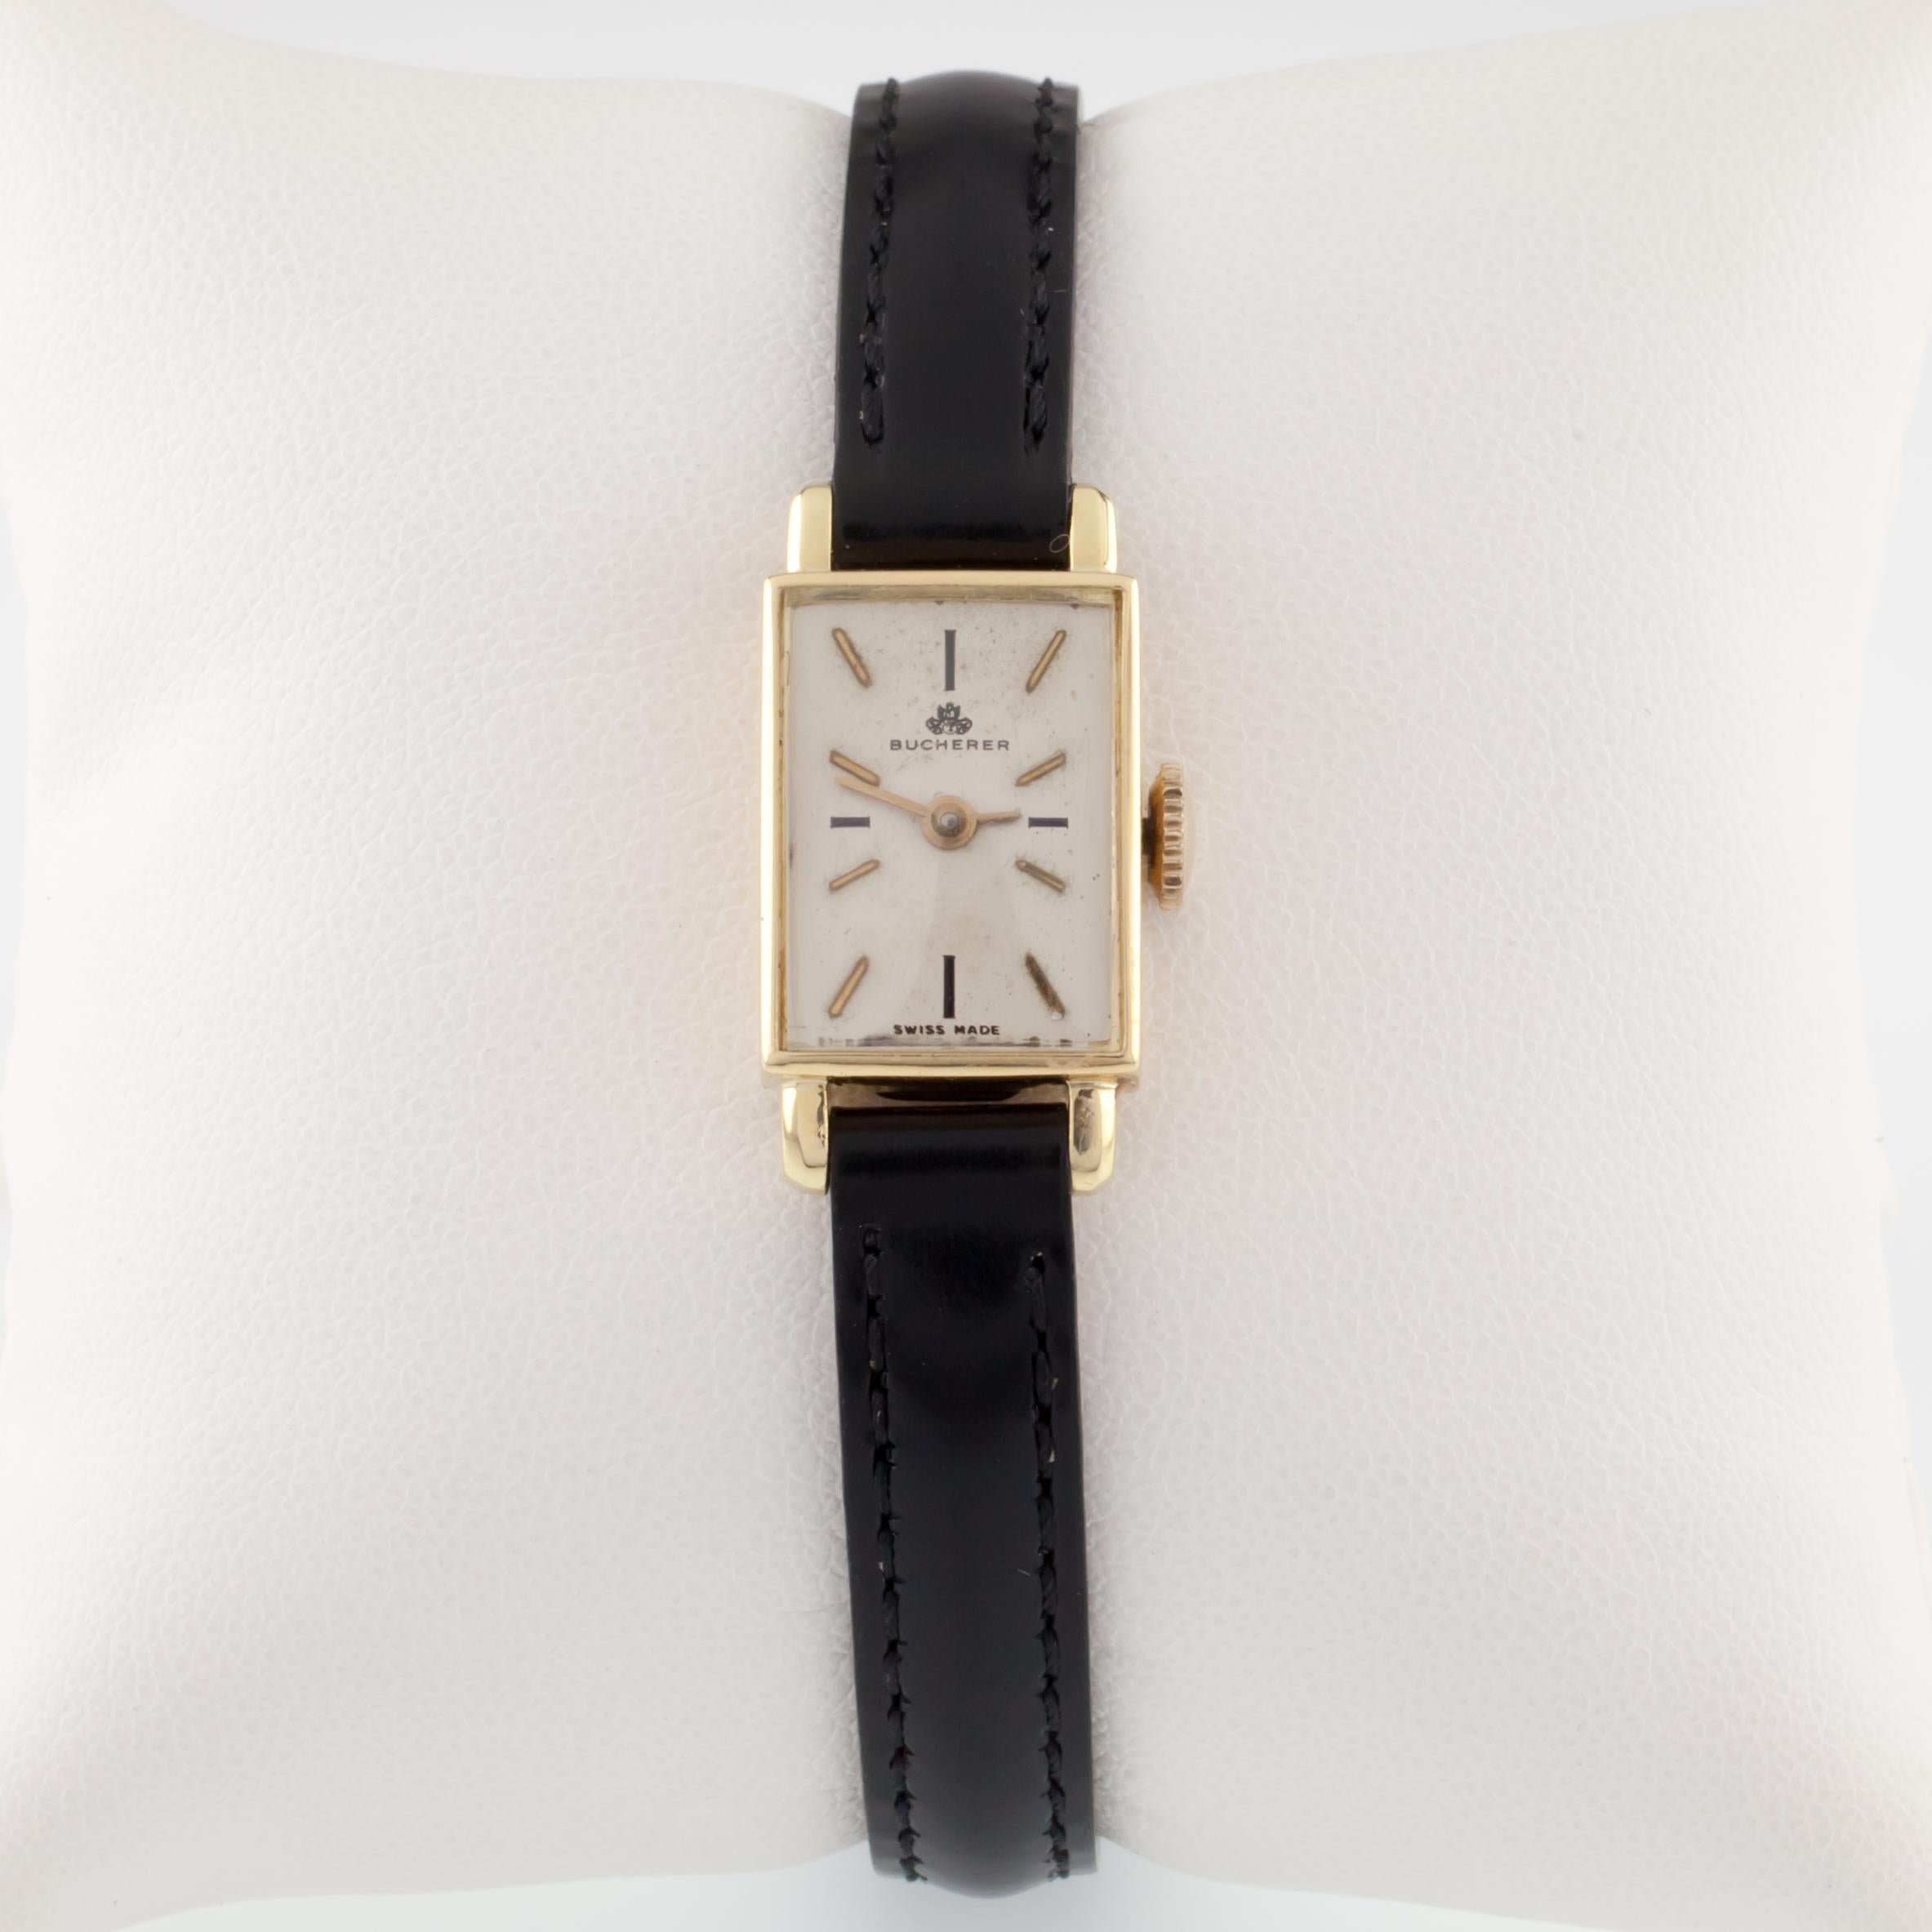 Bucherer 18k Yellow Gold Women's Hand-Winding Watch w/ Leather Band
Movement #6650
Case #4306T

18k Yellow Gold Rectangular Case
13 mm Wide (15 mm w/ Crown)
Lug-to-Lug Distance = 25 mm
Lug-to-Lug Width = 8 mm

Beige Dial w/ Gold Tic Marks and Hands